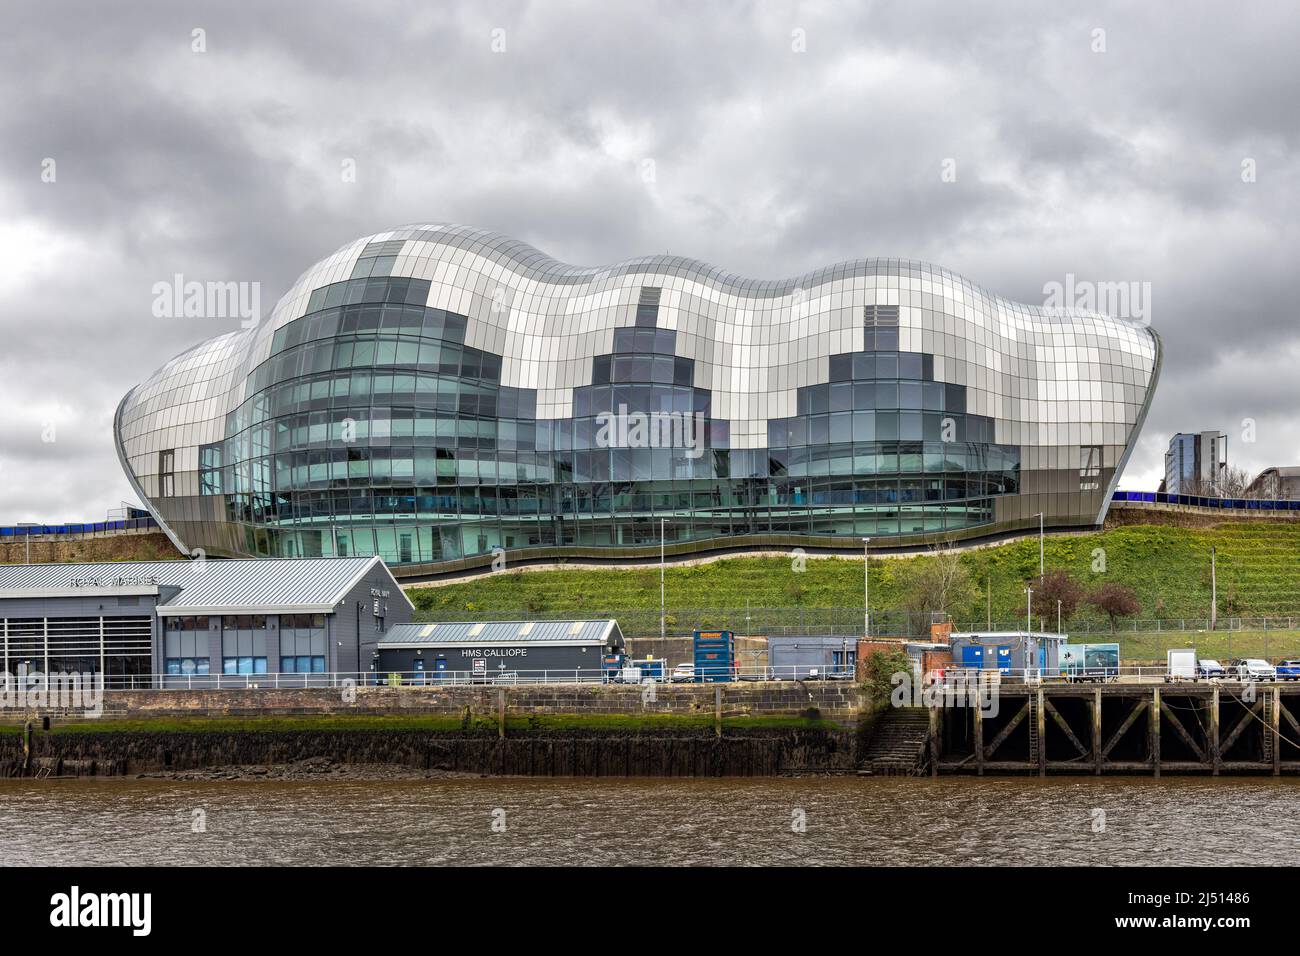 The Sage concert and music venue is located in Gateshead, on the southern bank of the River Tyne. Stock Photo